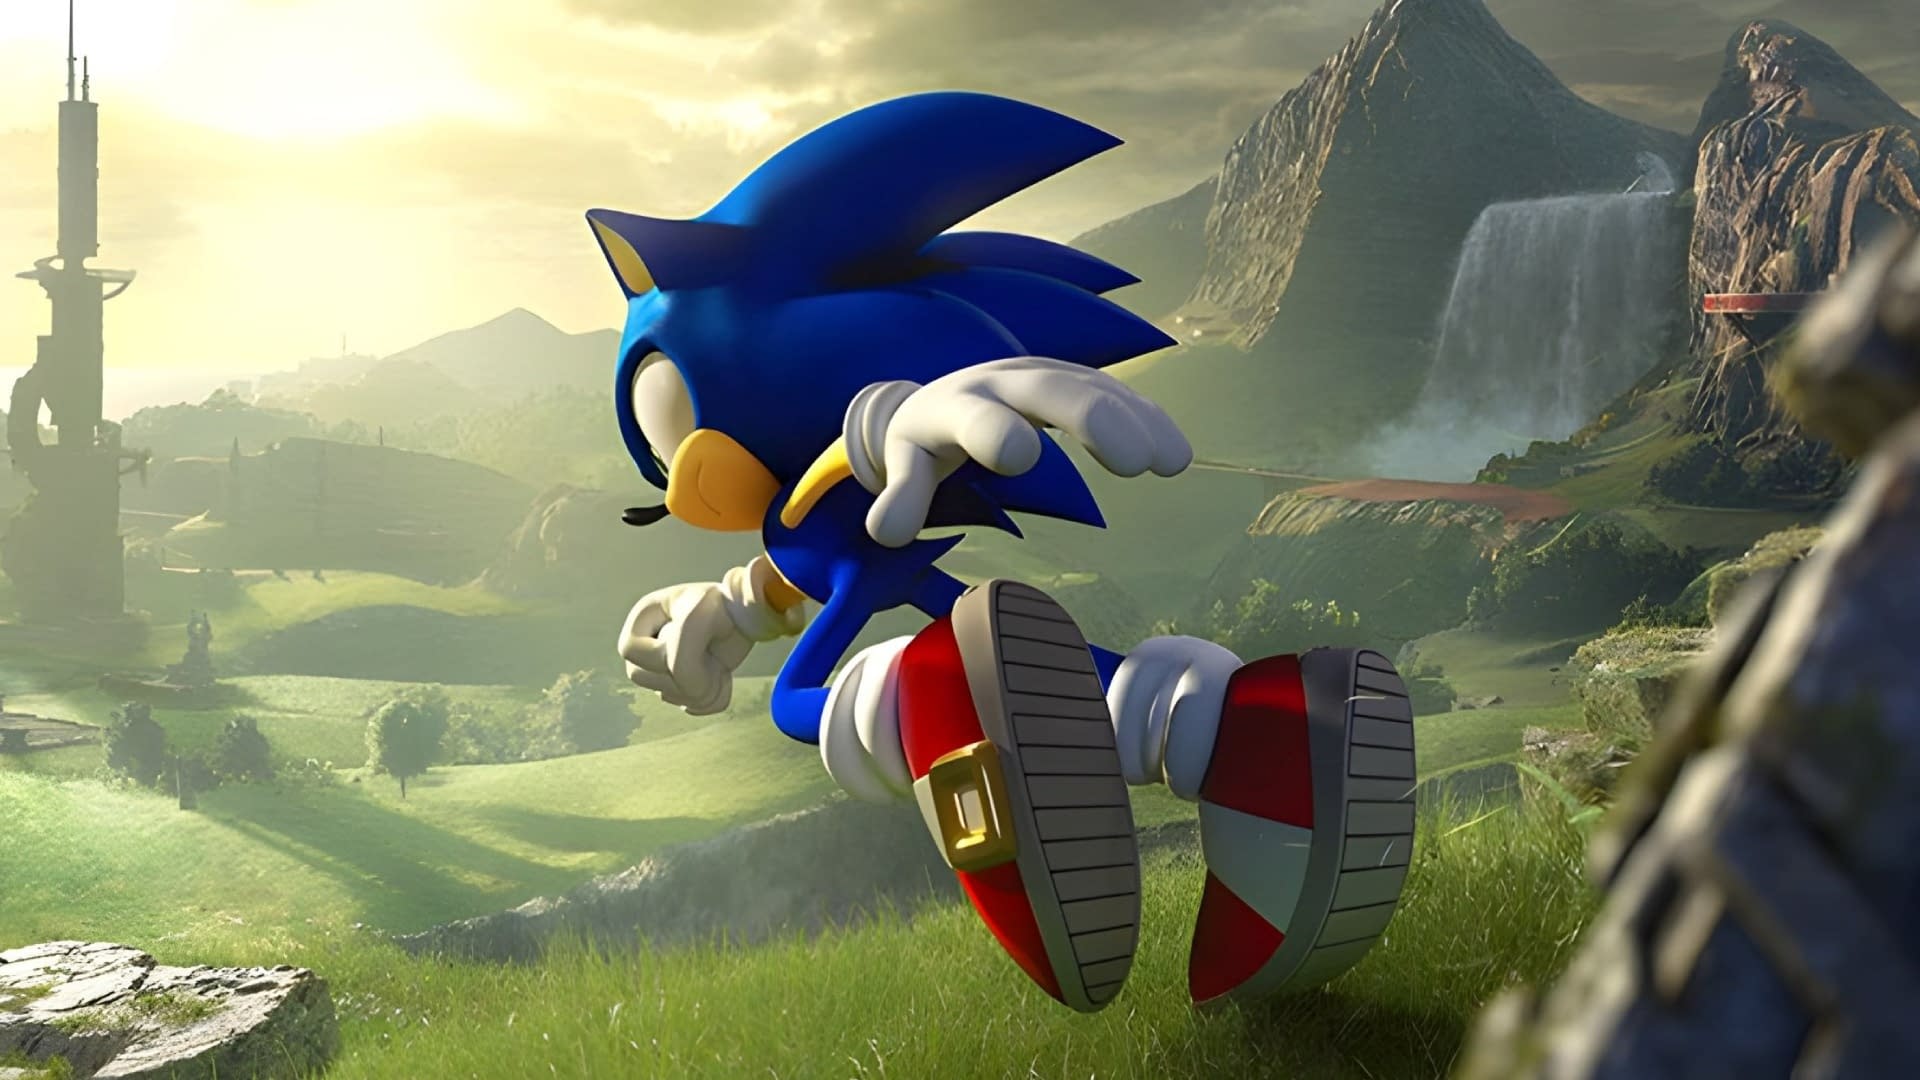 Faces are laughing in Sega! Sonic Frontiers sales exceeded expectations